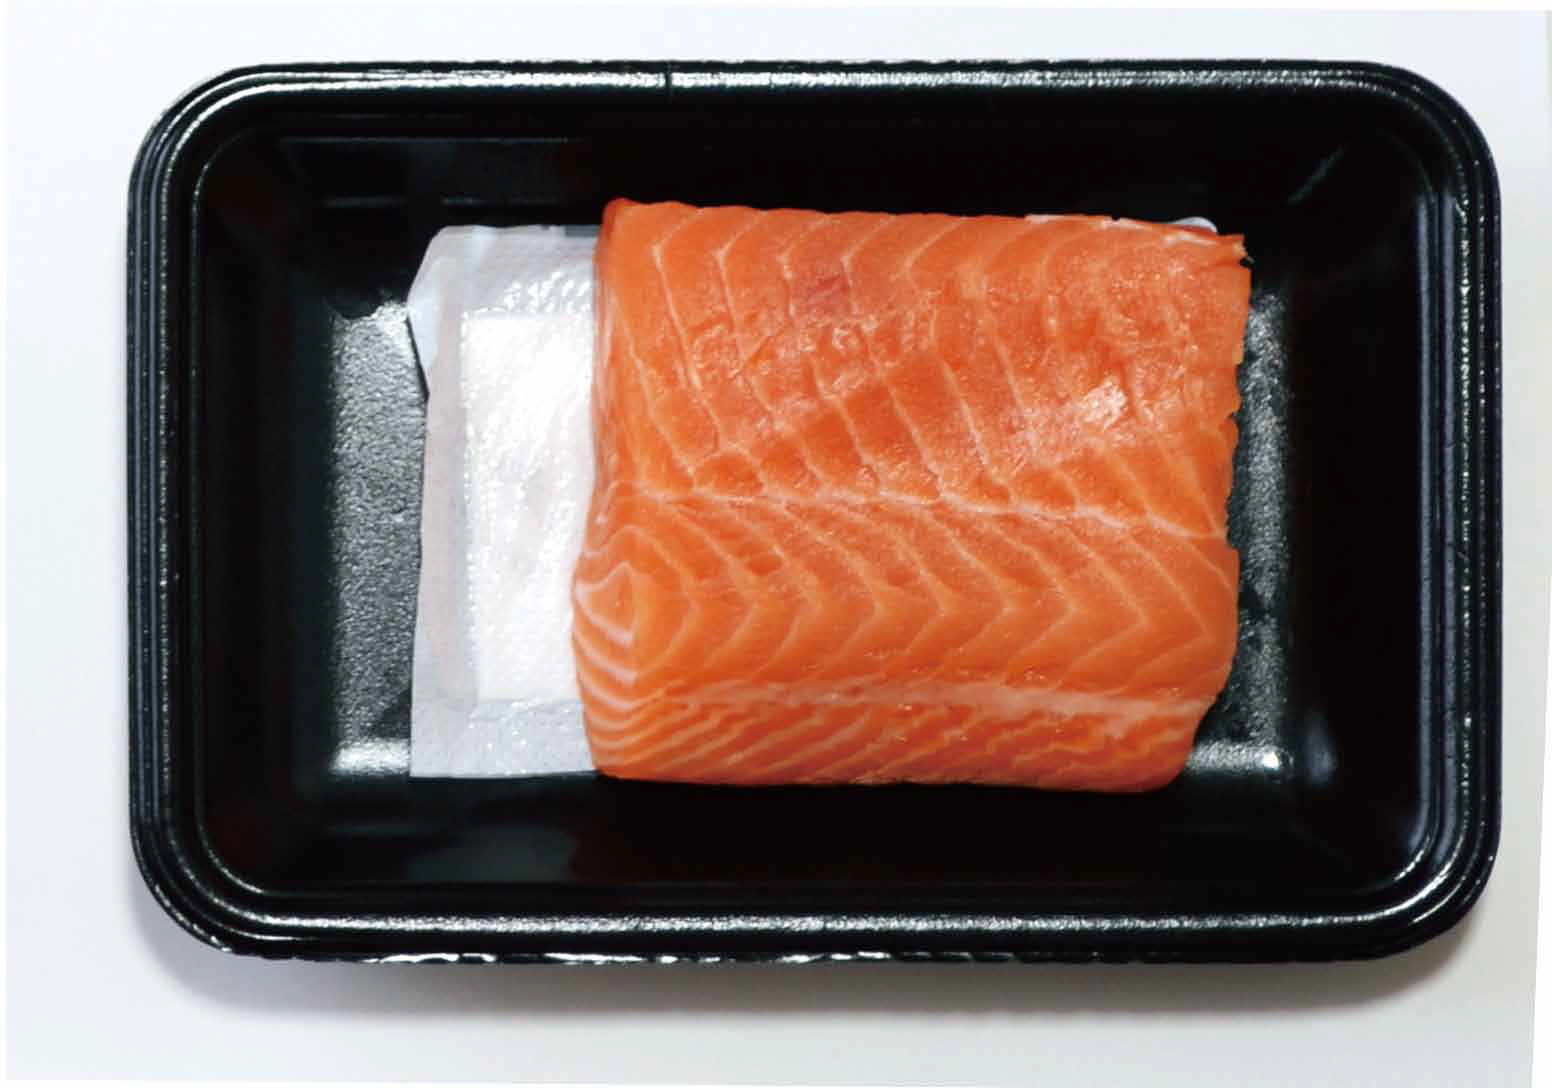 Demi pad Absorbent pad for sushi to absorb excess moisture for cut fish fillets